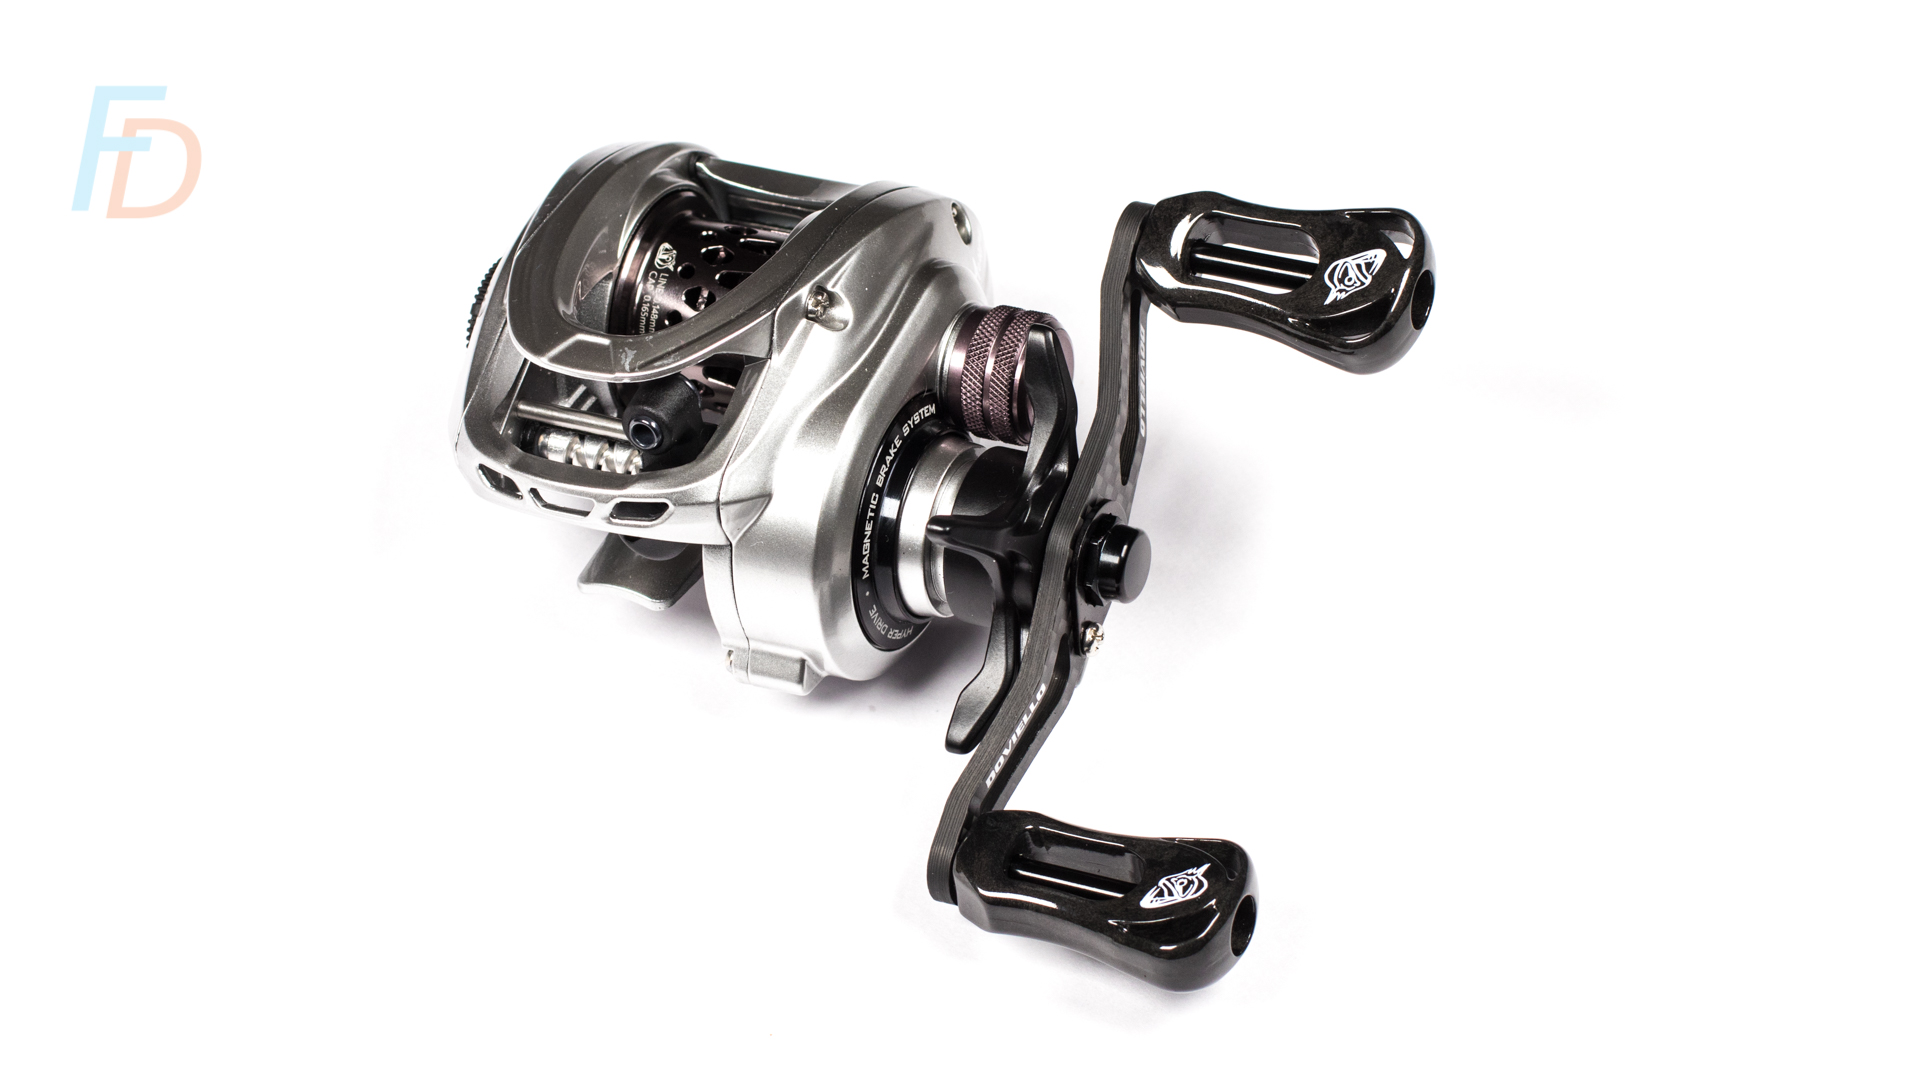 Best Baitcasting Reel Under 100 $USD or £GBP: The Results are In